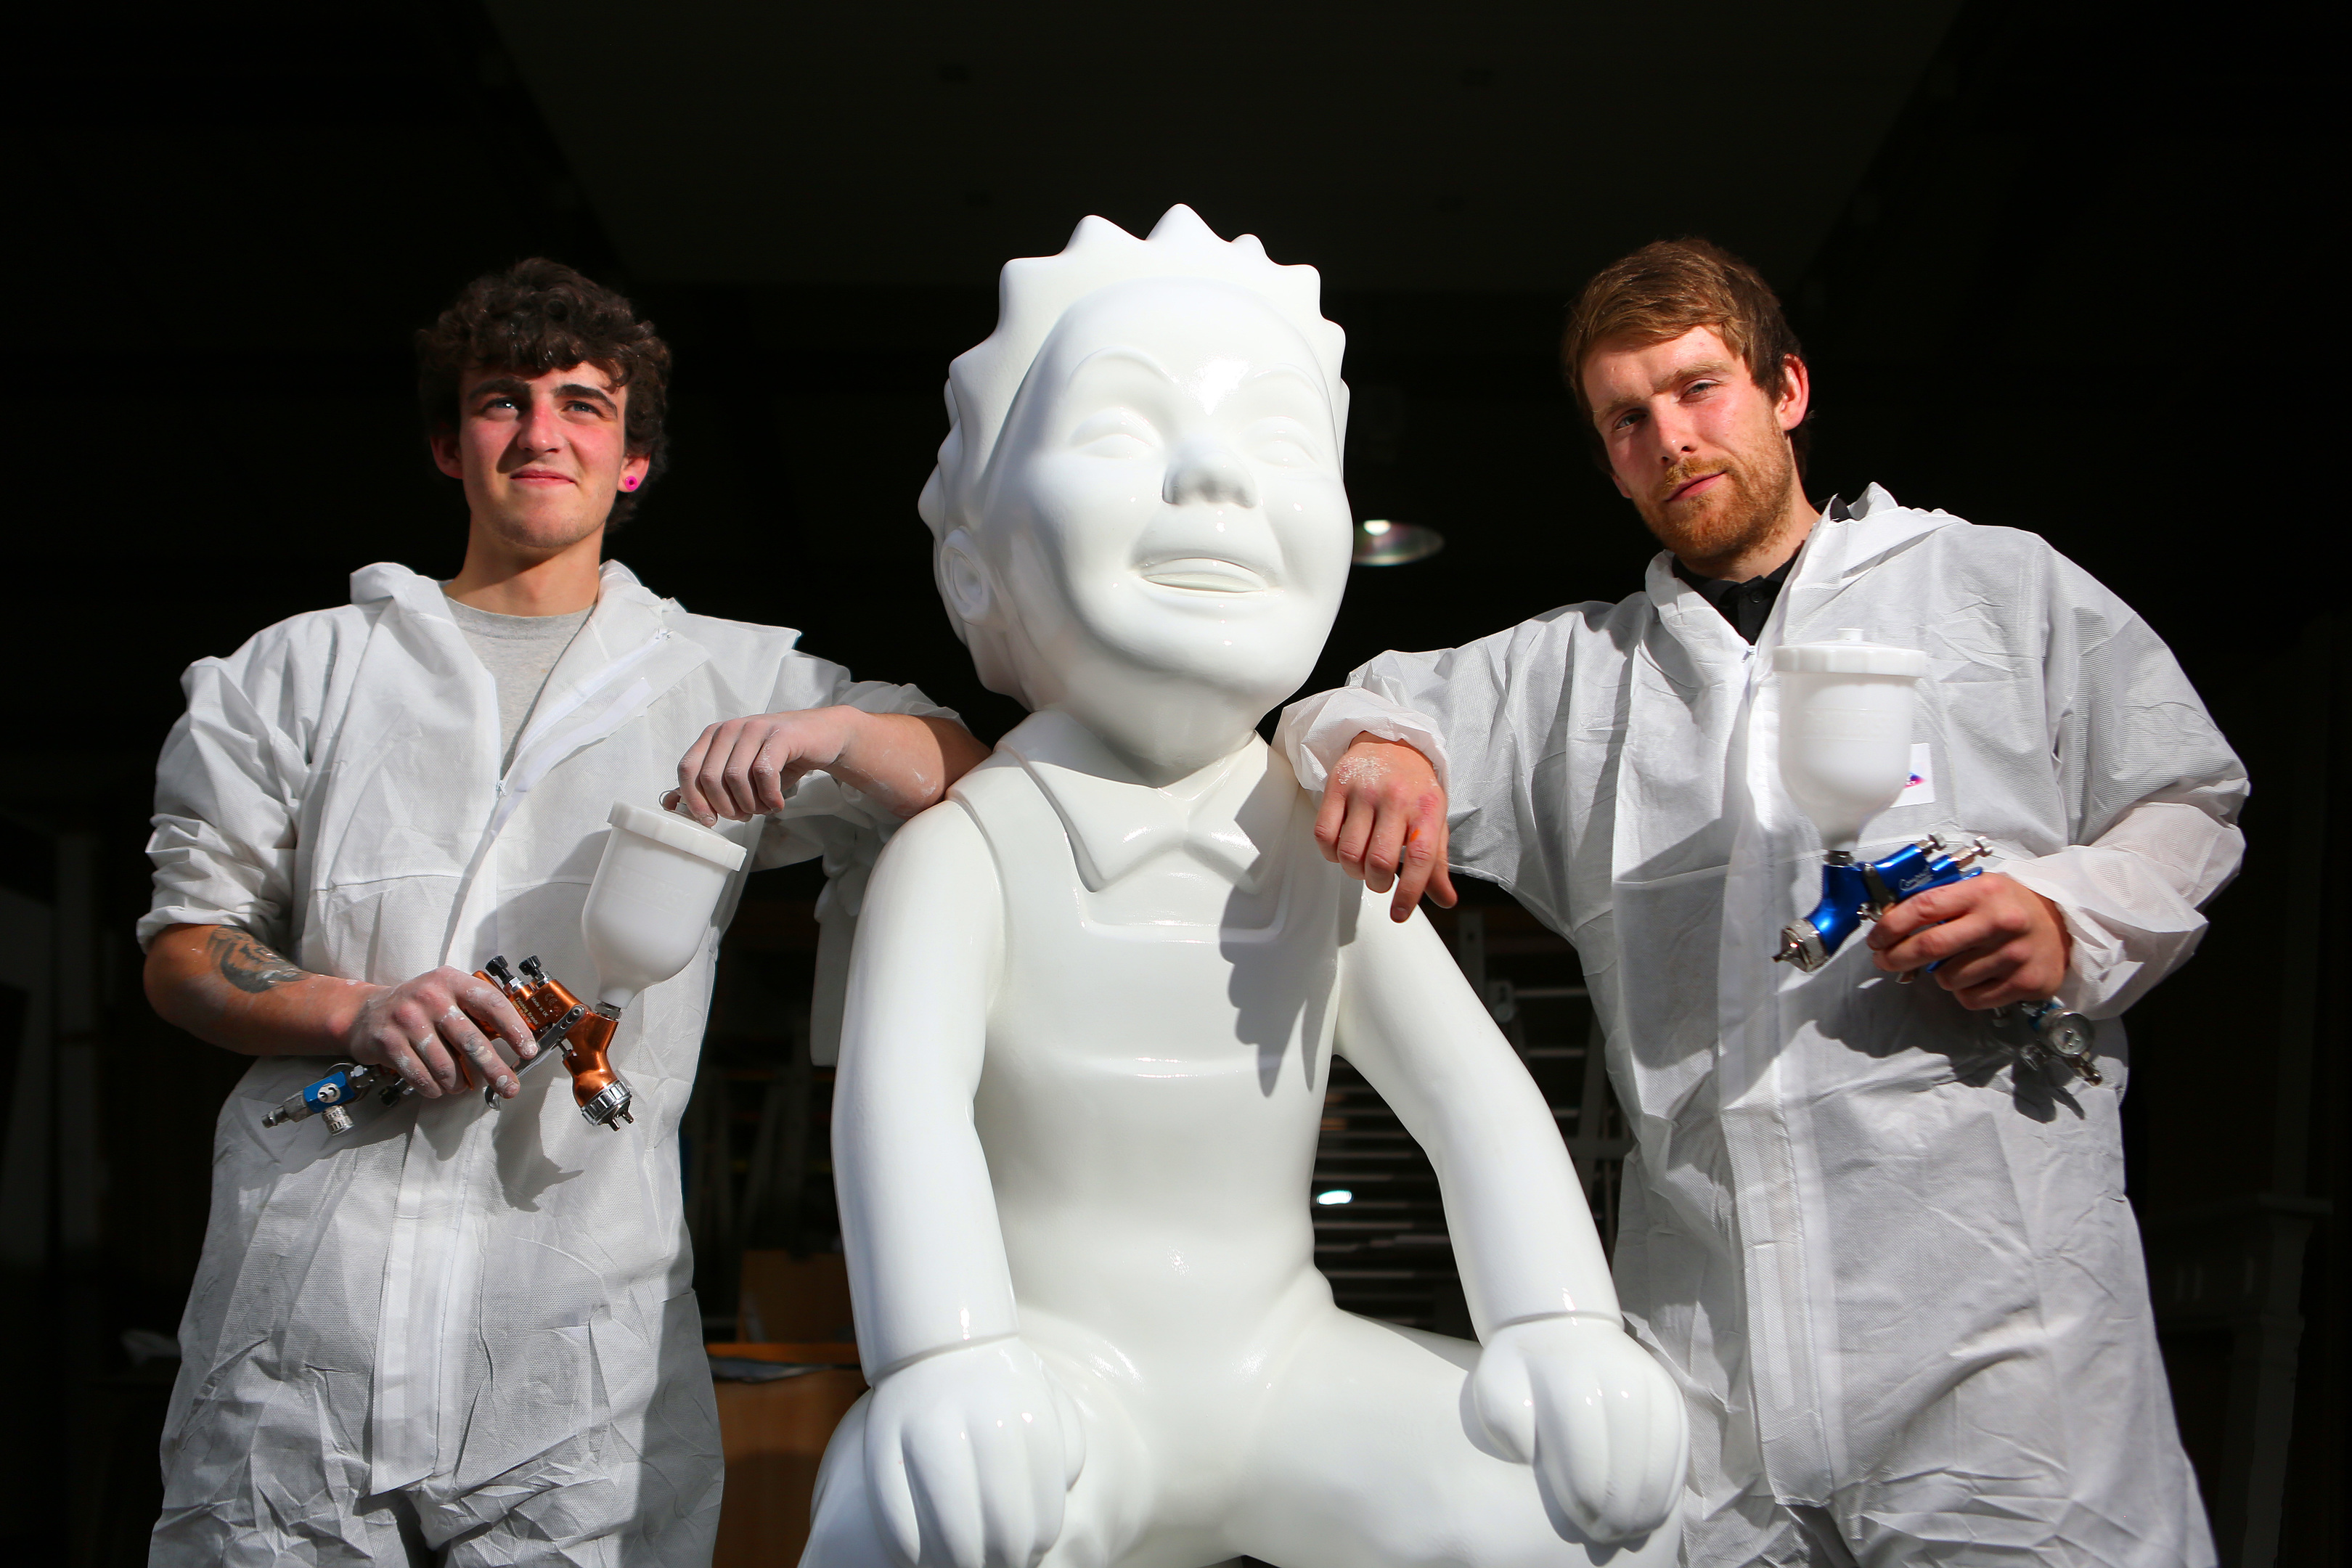 Spray painters, Andrew Mackinnon and Marc Meldrum who painted a lot of the sculptures saying farewell to the final one.